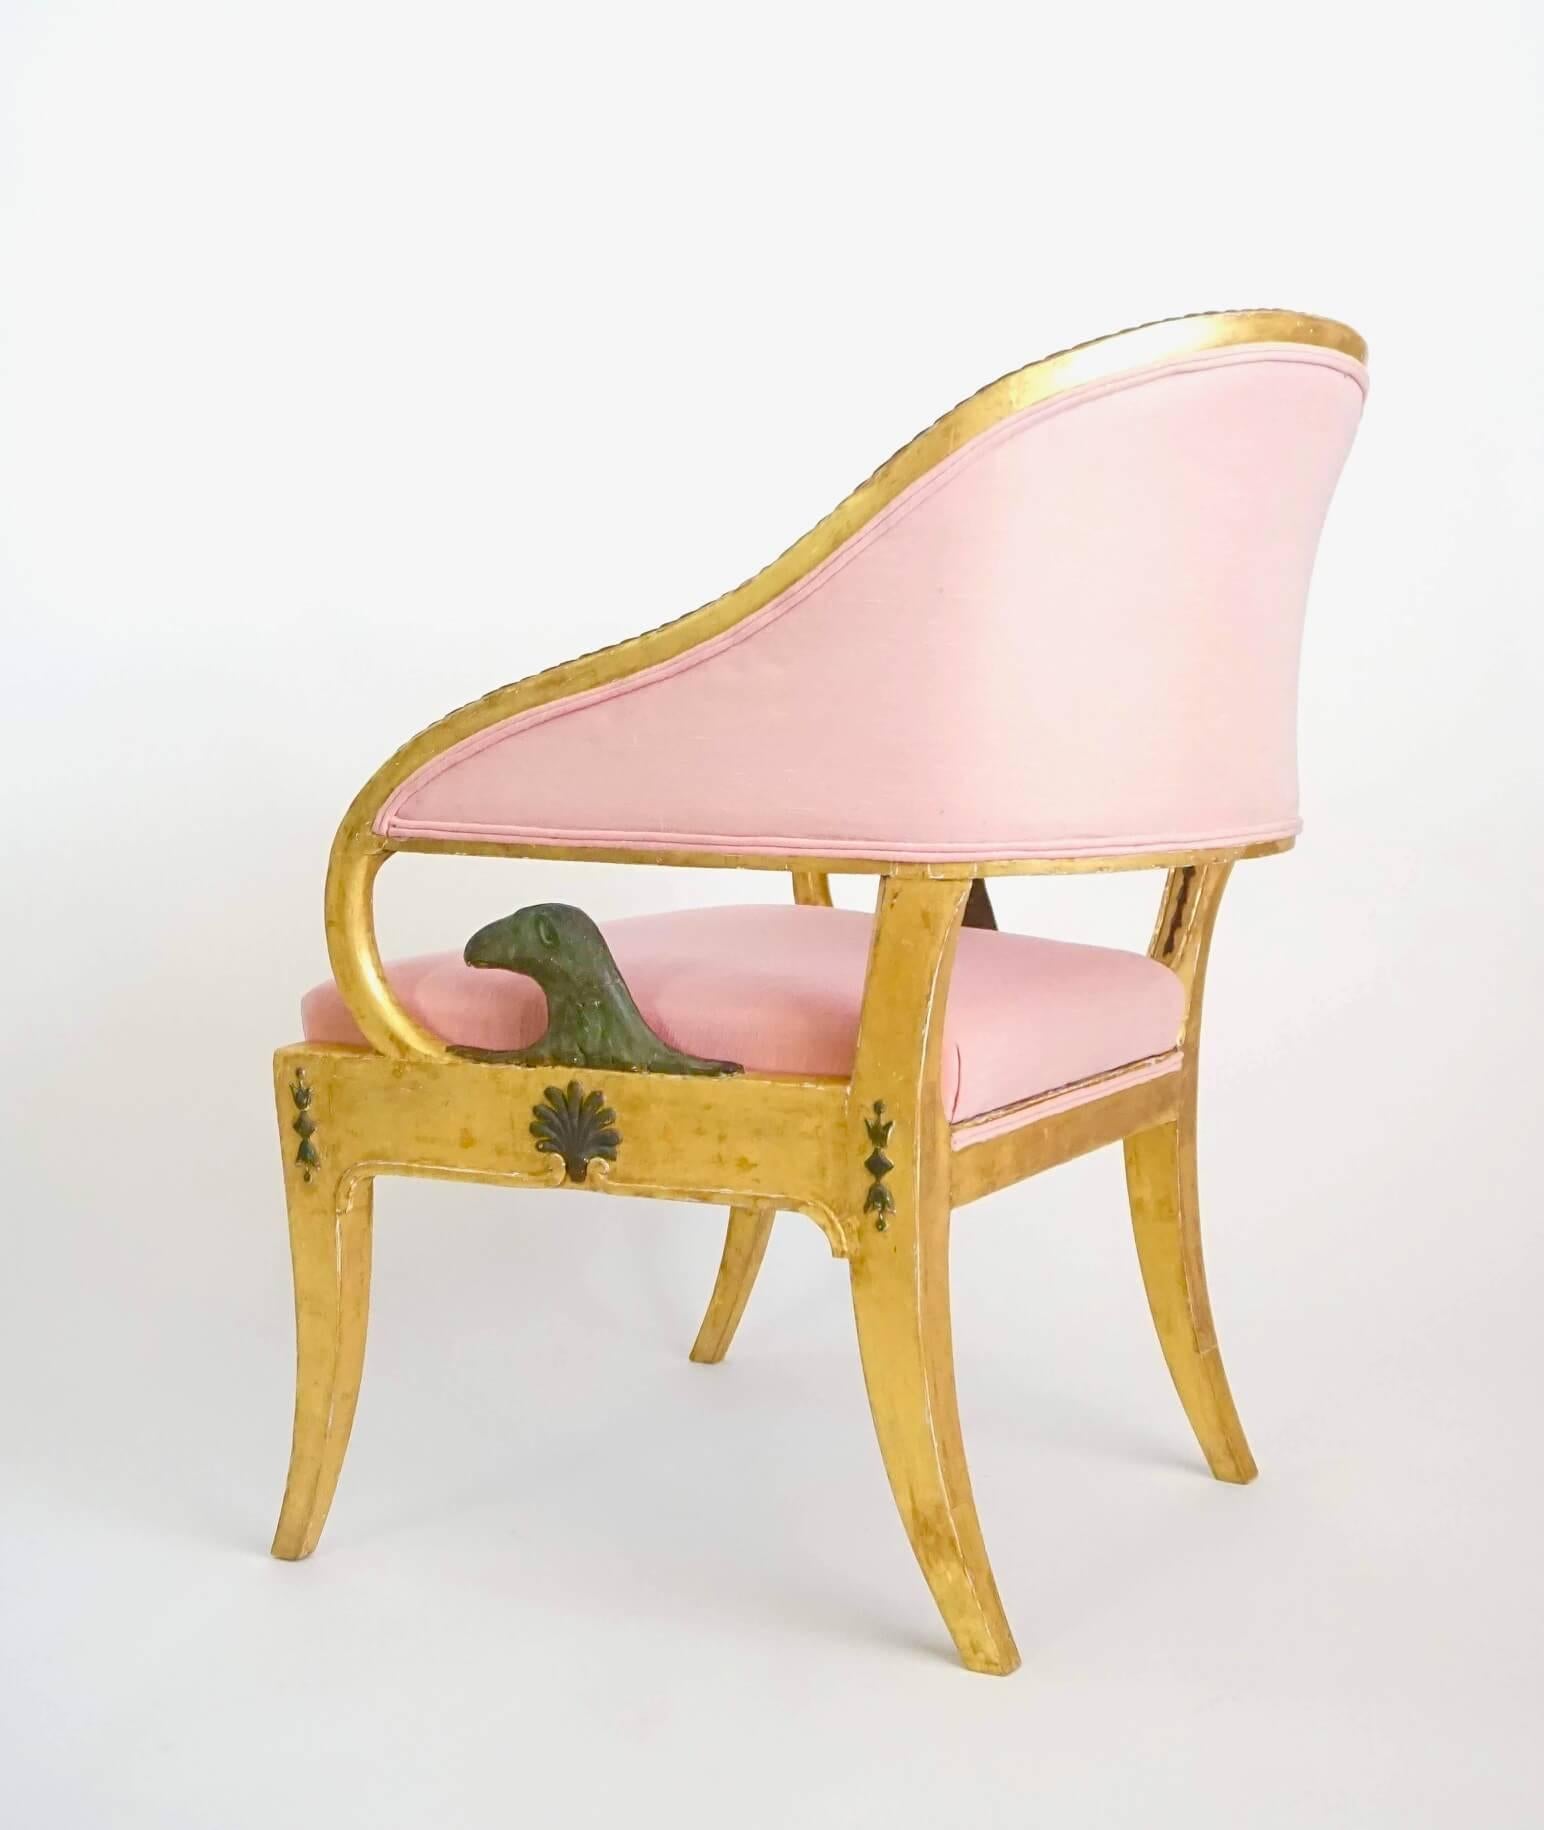 18th Century Swedish Gustavian Neoclassical Giltwood Fauteuil by Ephraim Ståhl, circa 1800 For Sale